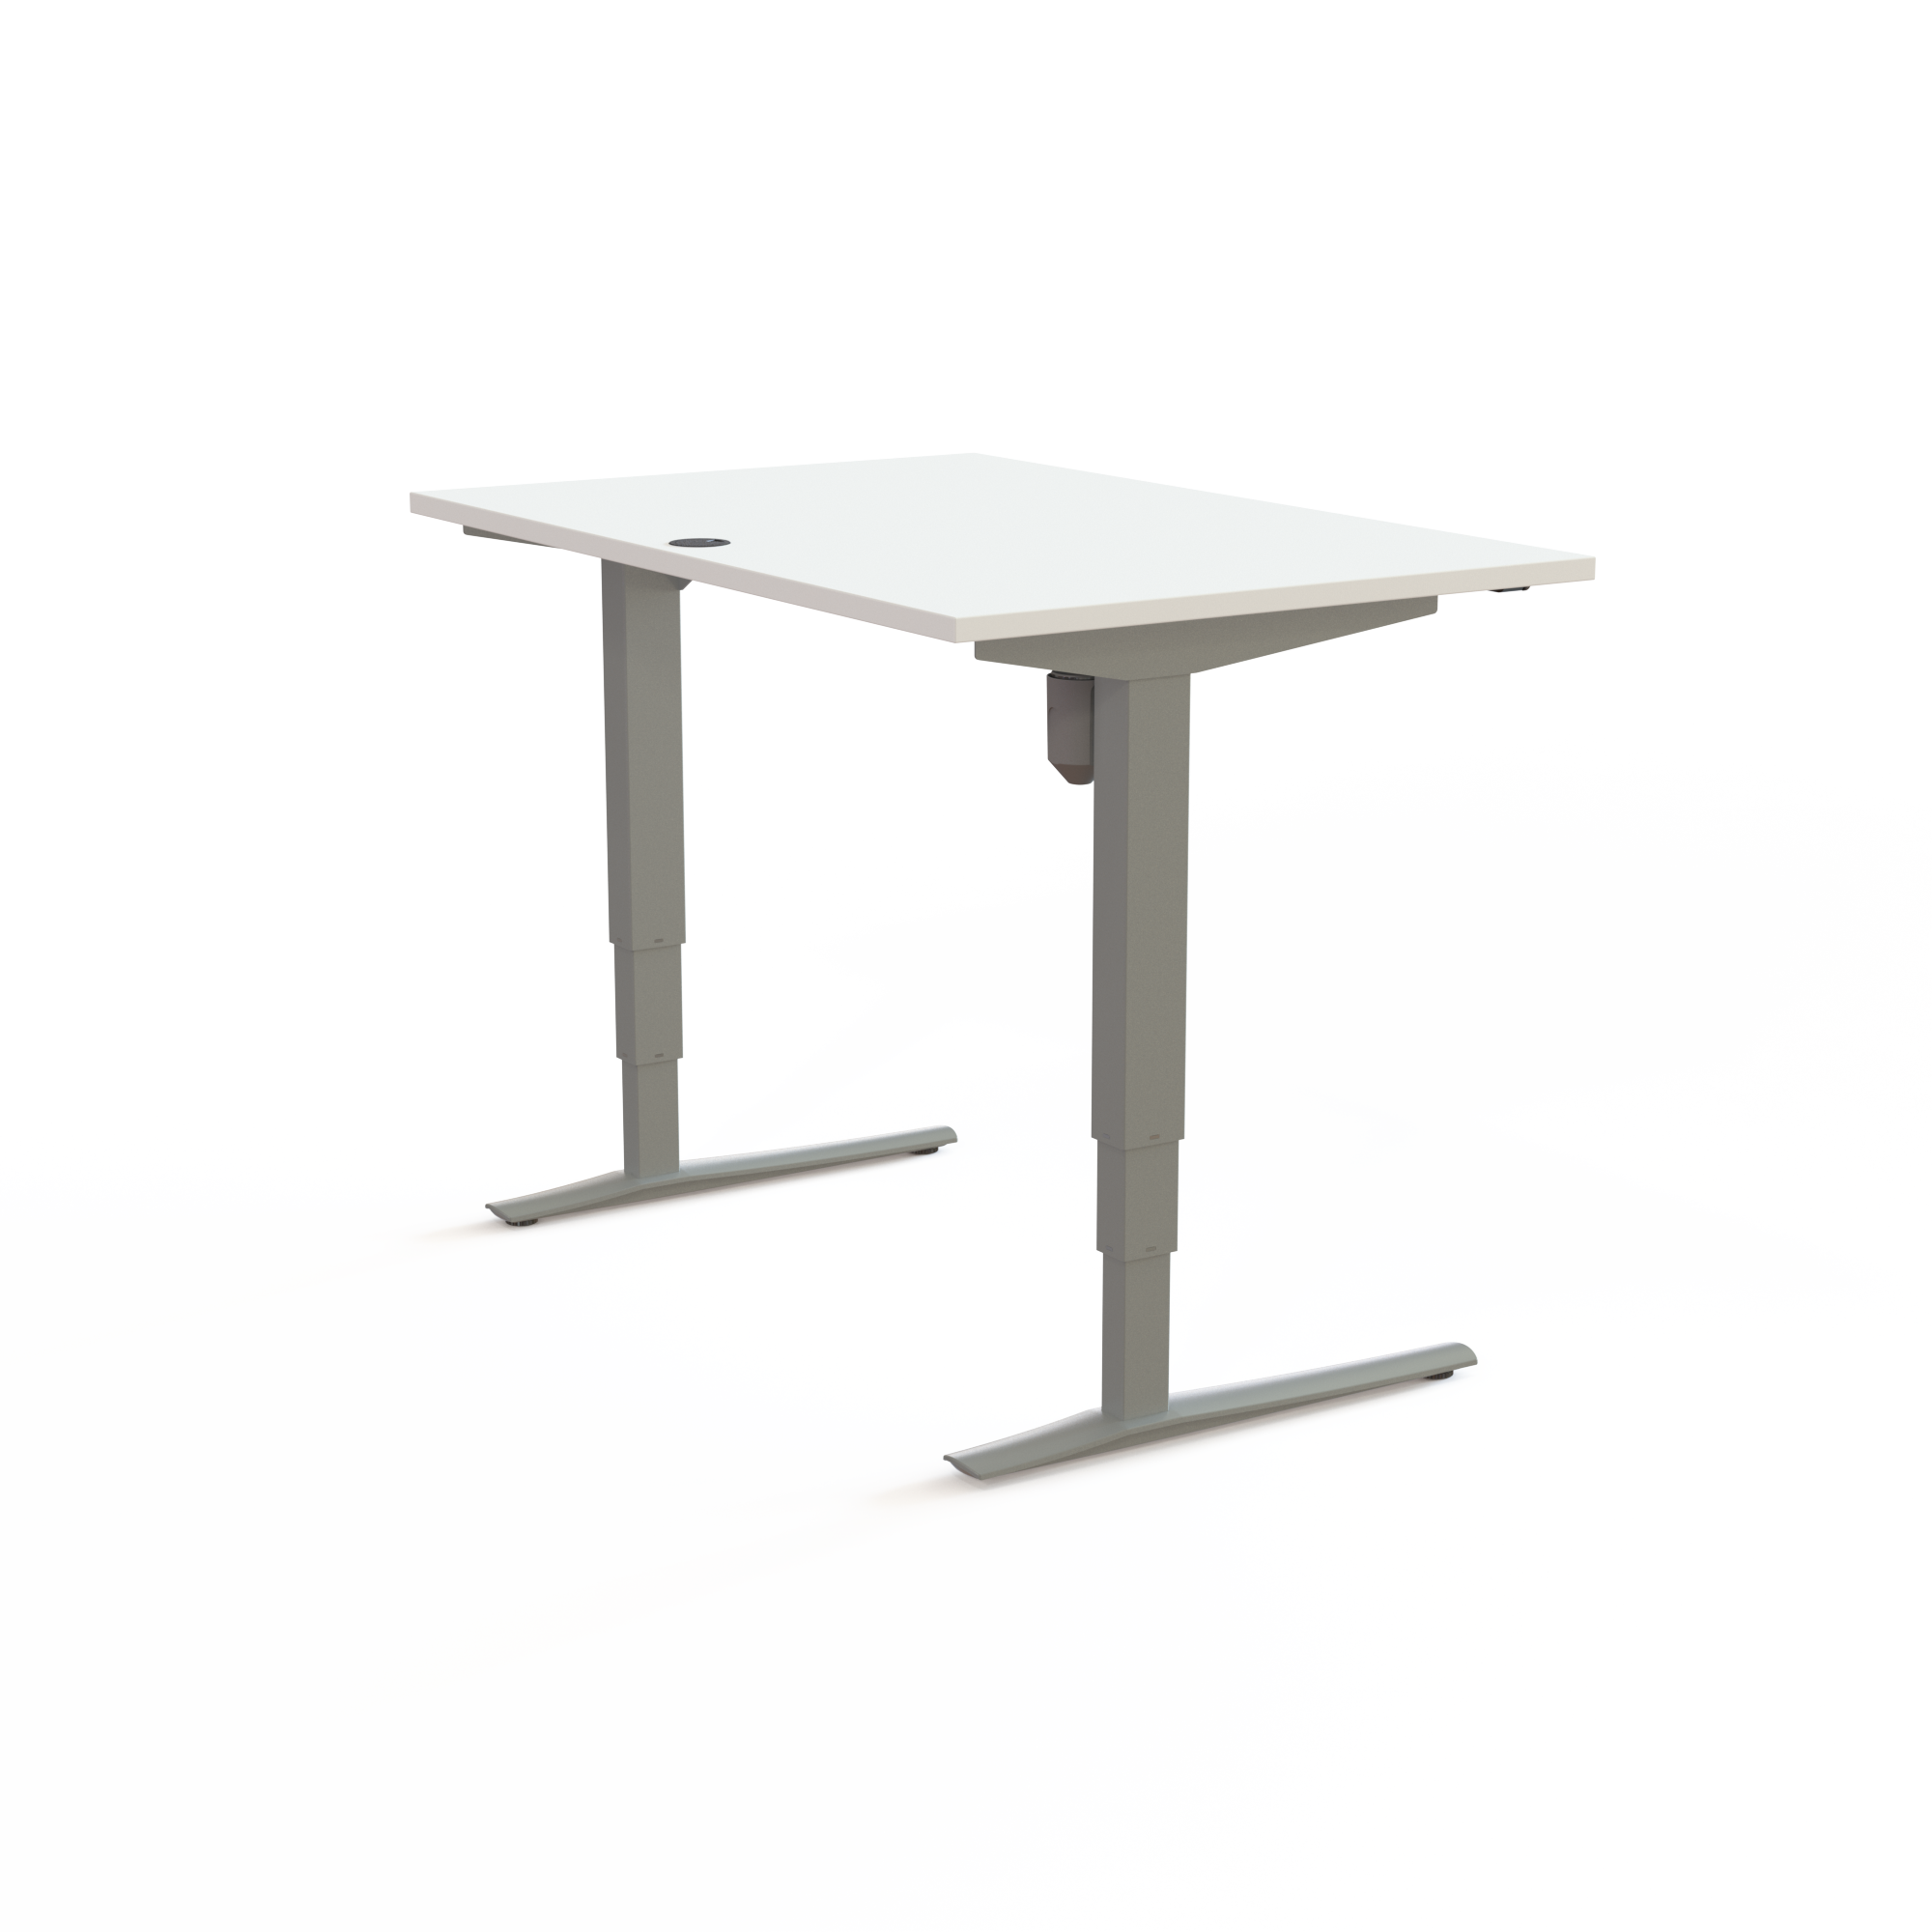 Electric Adjustable Desk | 120x80 cm | White with silver frame